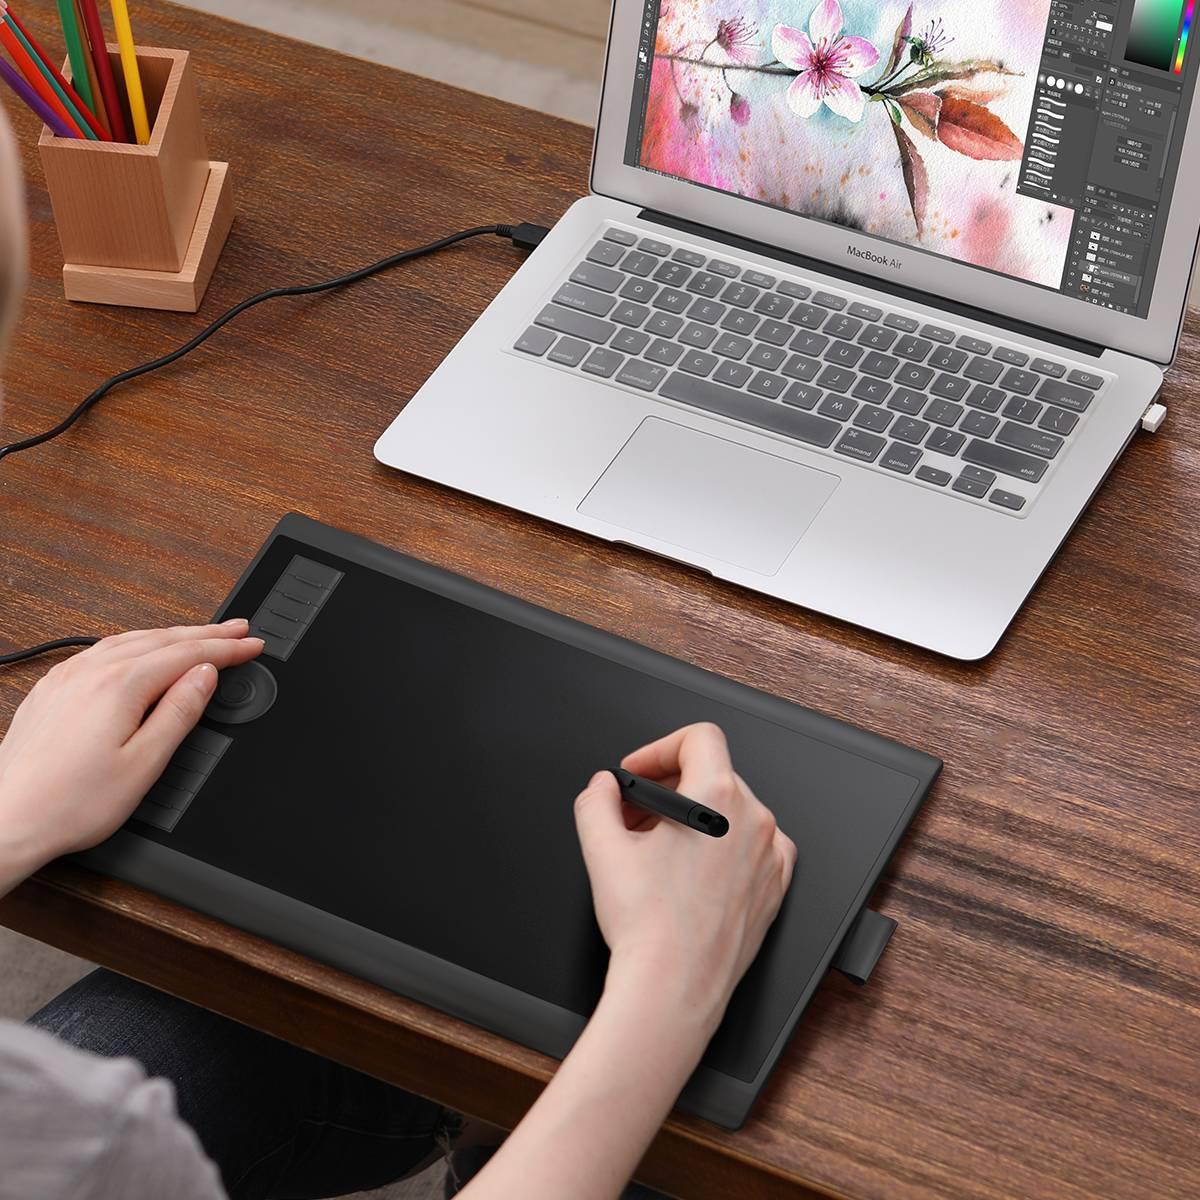 GAOMON M10K 2018 Graphics Drawing Tablet on Linux for Digital Painting